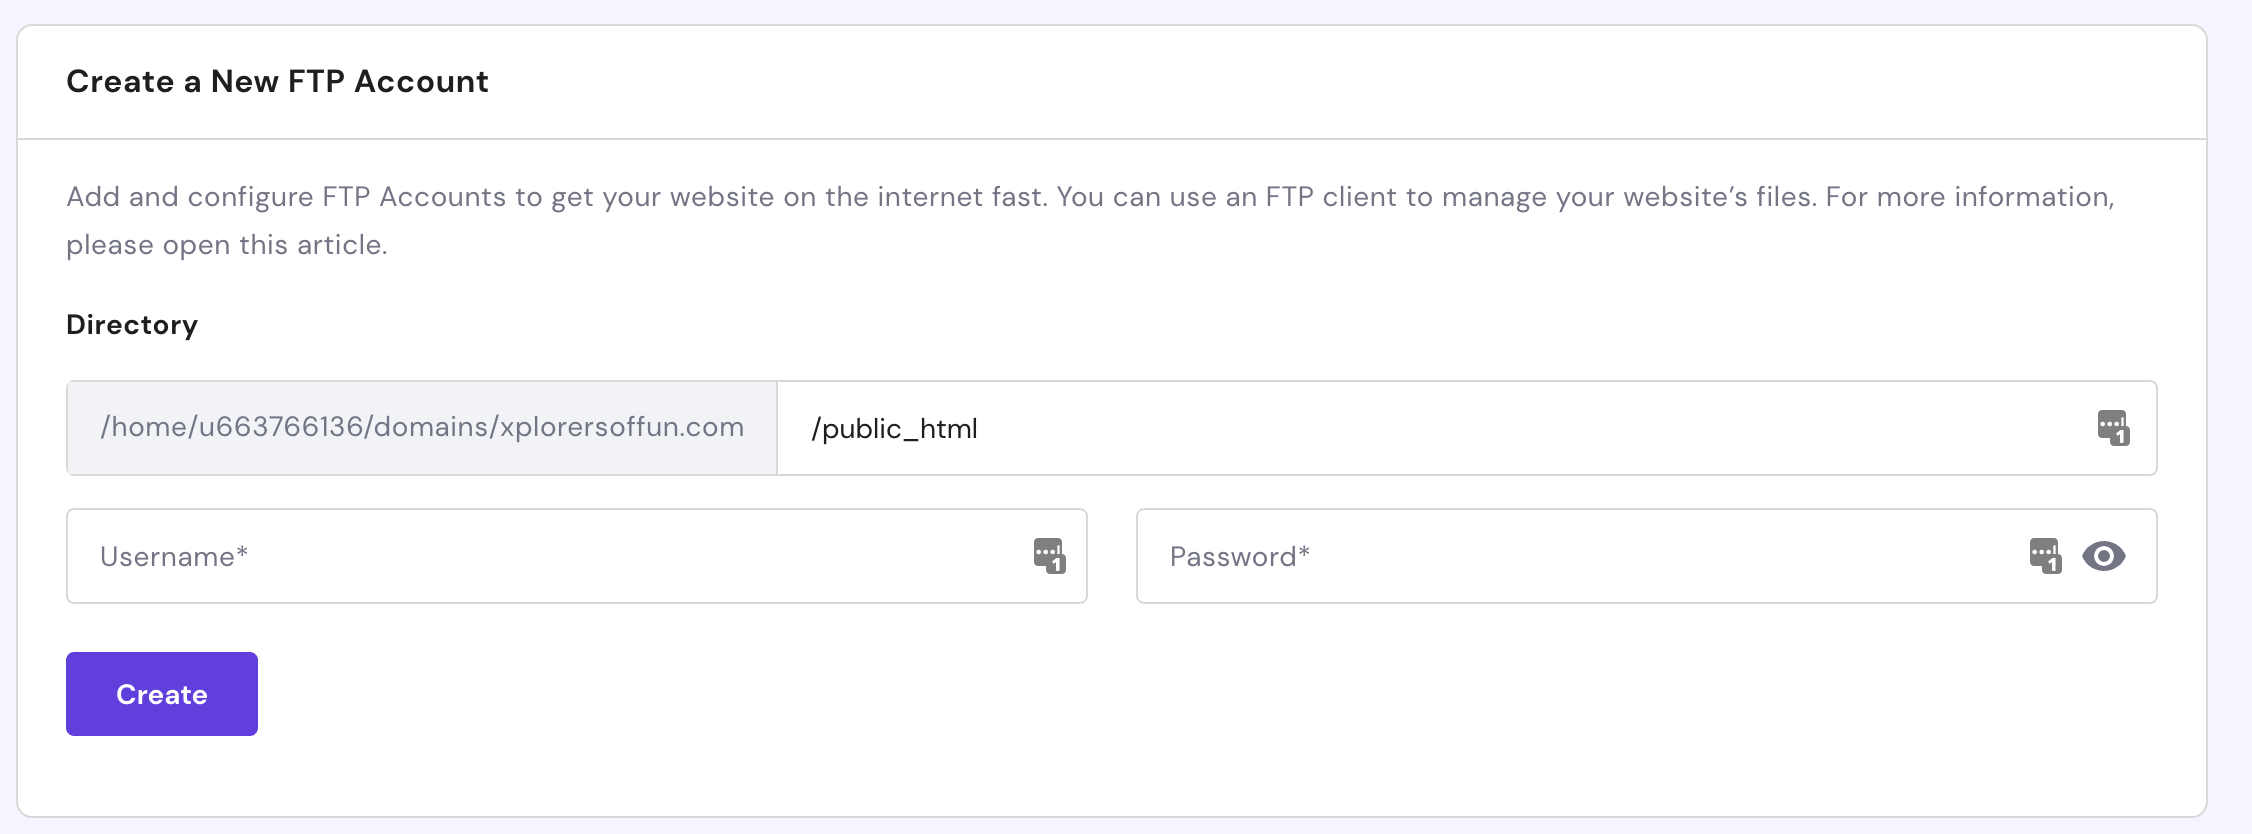 Hostinger Create a New FTP Account section